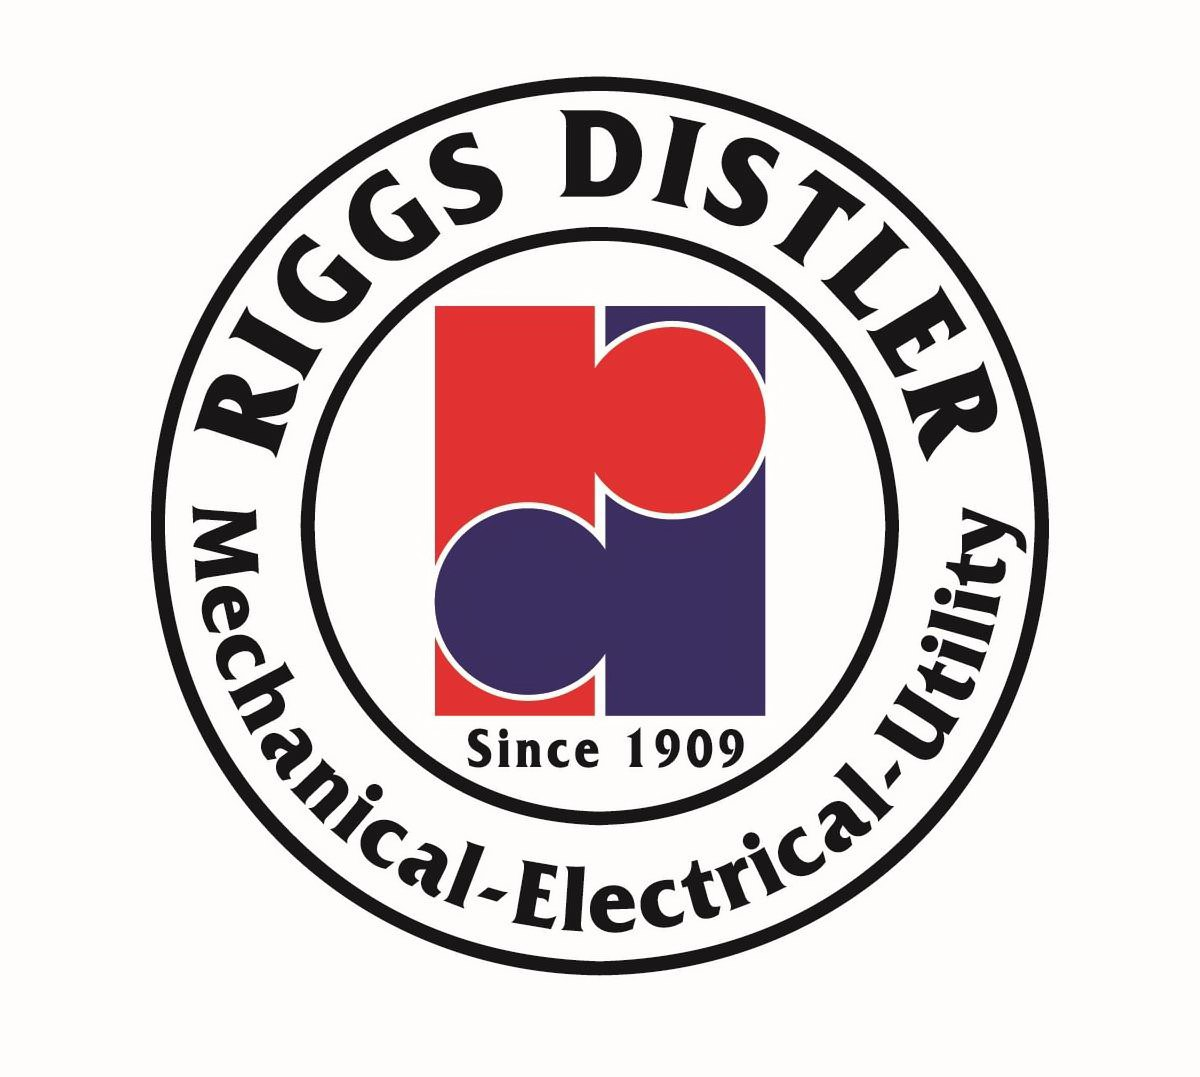  RIGGS DISTLER MECHANICAL ELECTRICAL UTILITY SINCE 1909